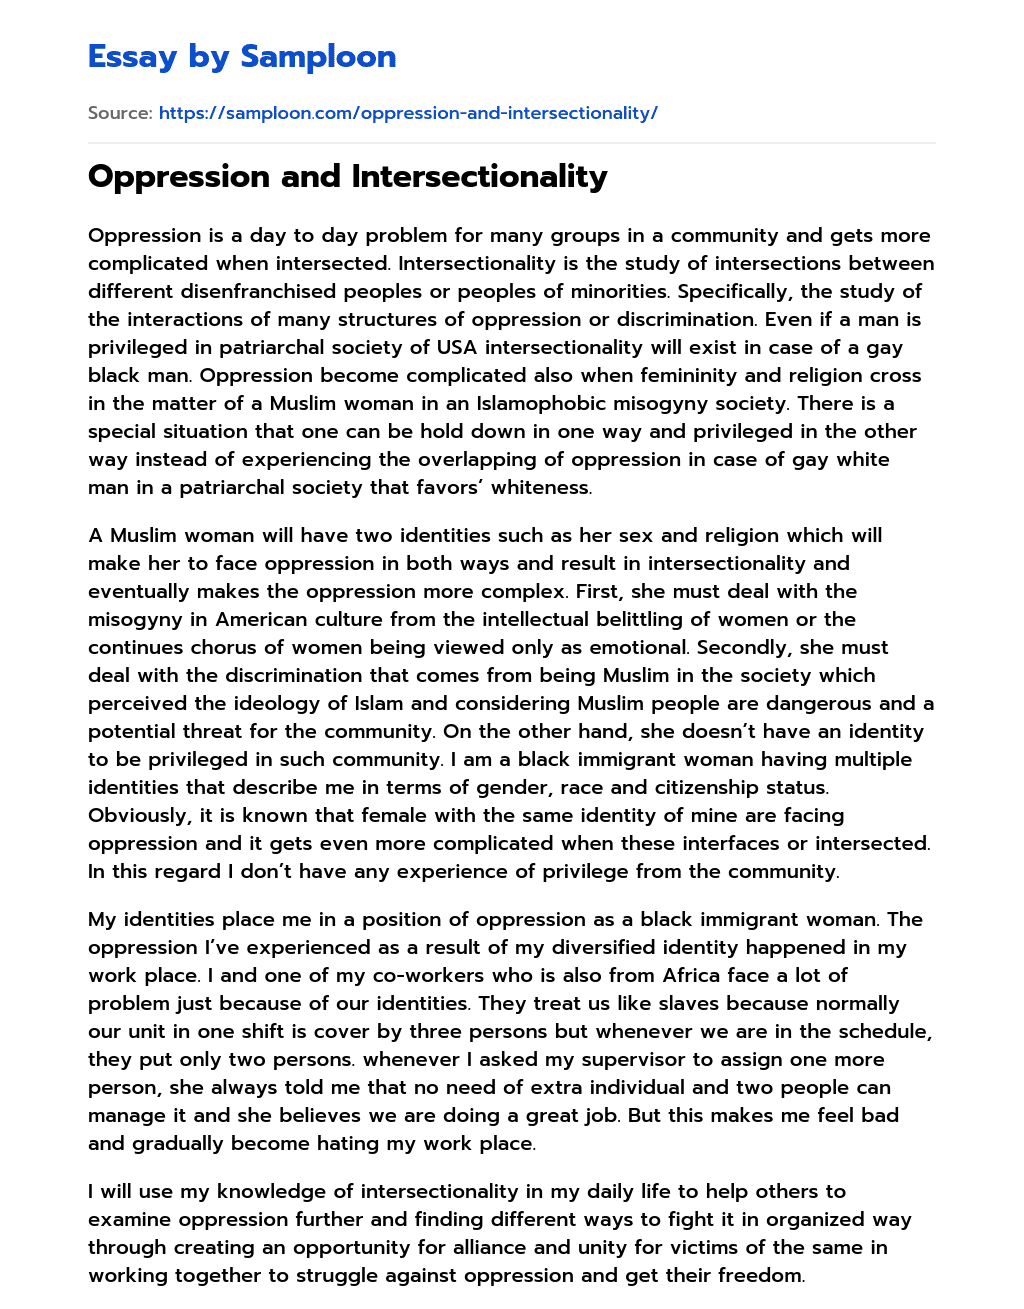 Oppression and Intersectionality essay